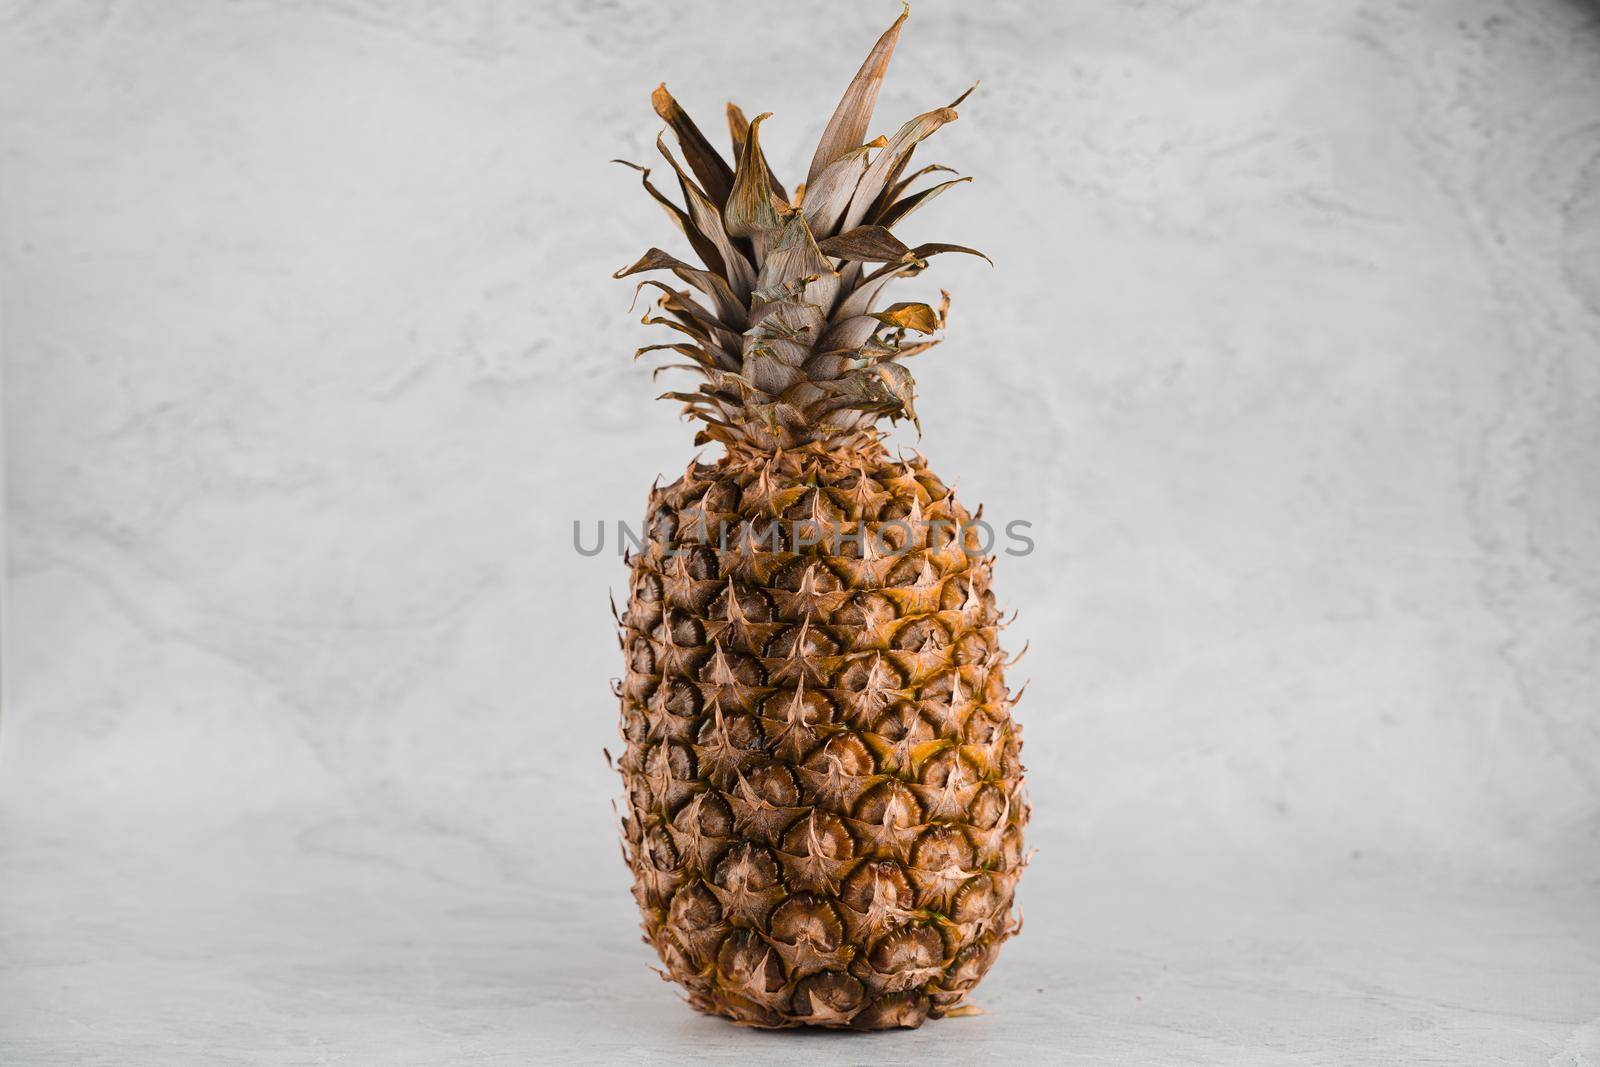 Pineapple tropical fruit on white stone background background. Citrus fruit with vitamin c for helth care